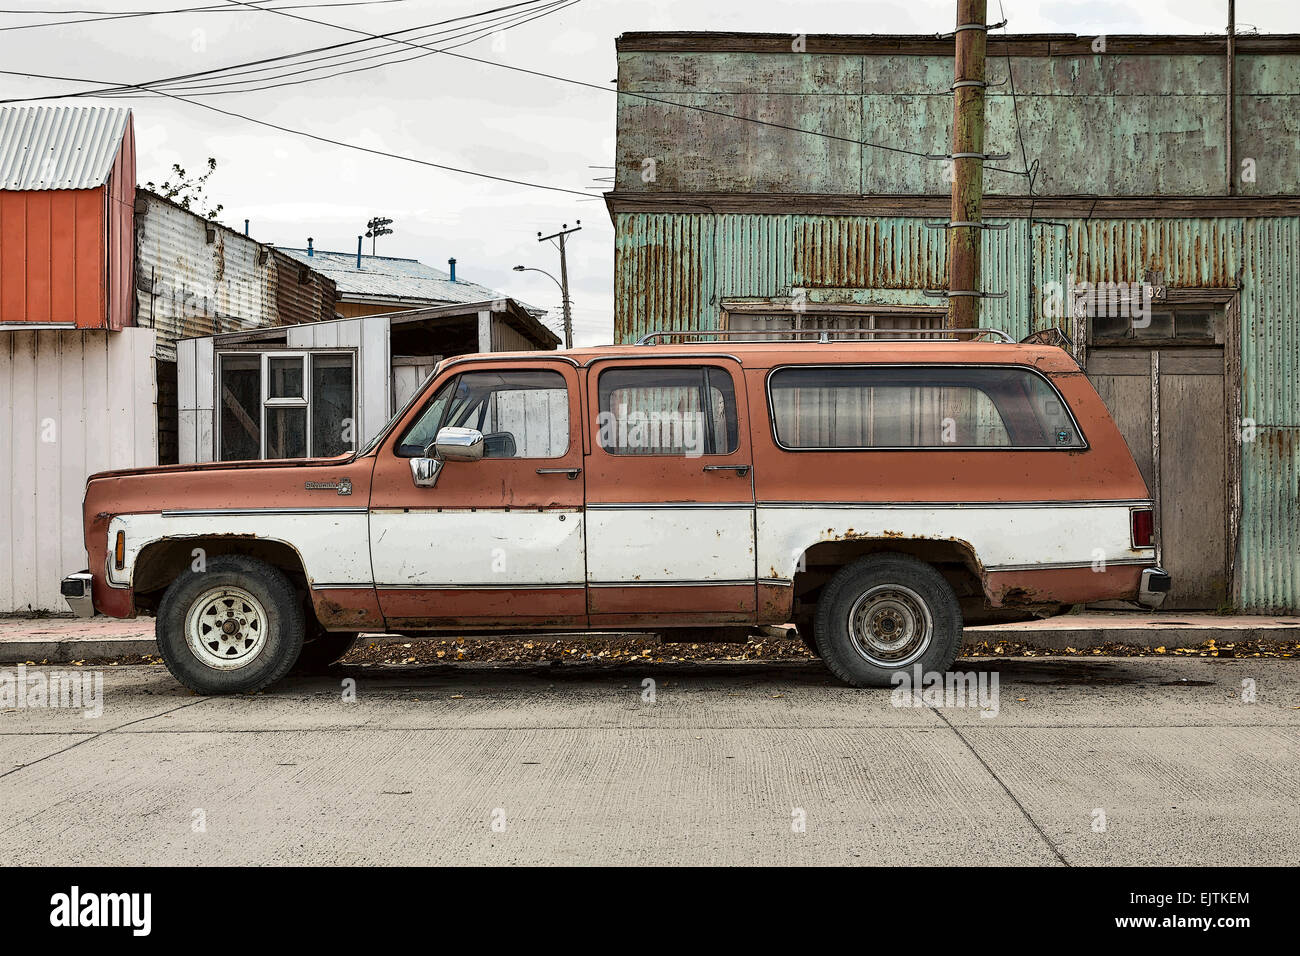 Manipulated image of a Chevrolet Suburban K10 400 Silverado, late 1970s/early 1980s.  Puerto Natales, Chile Stock Photo